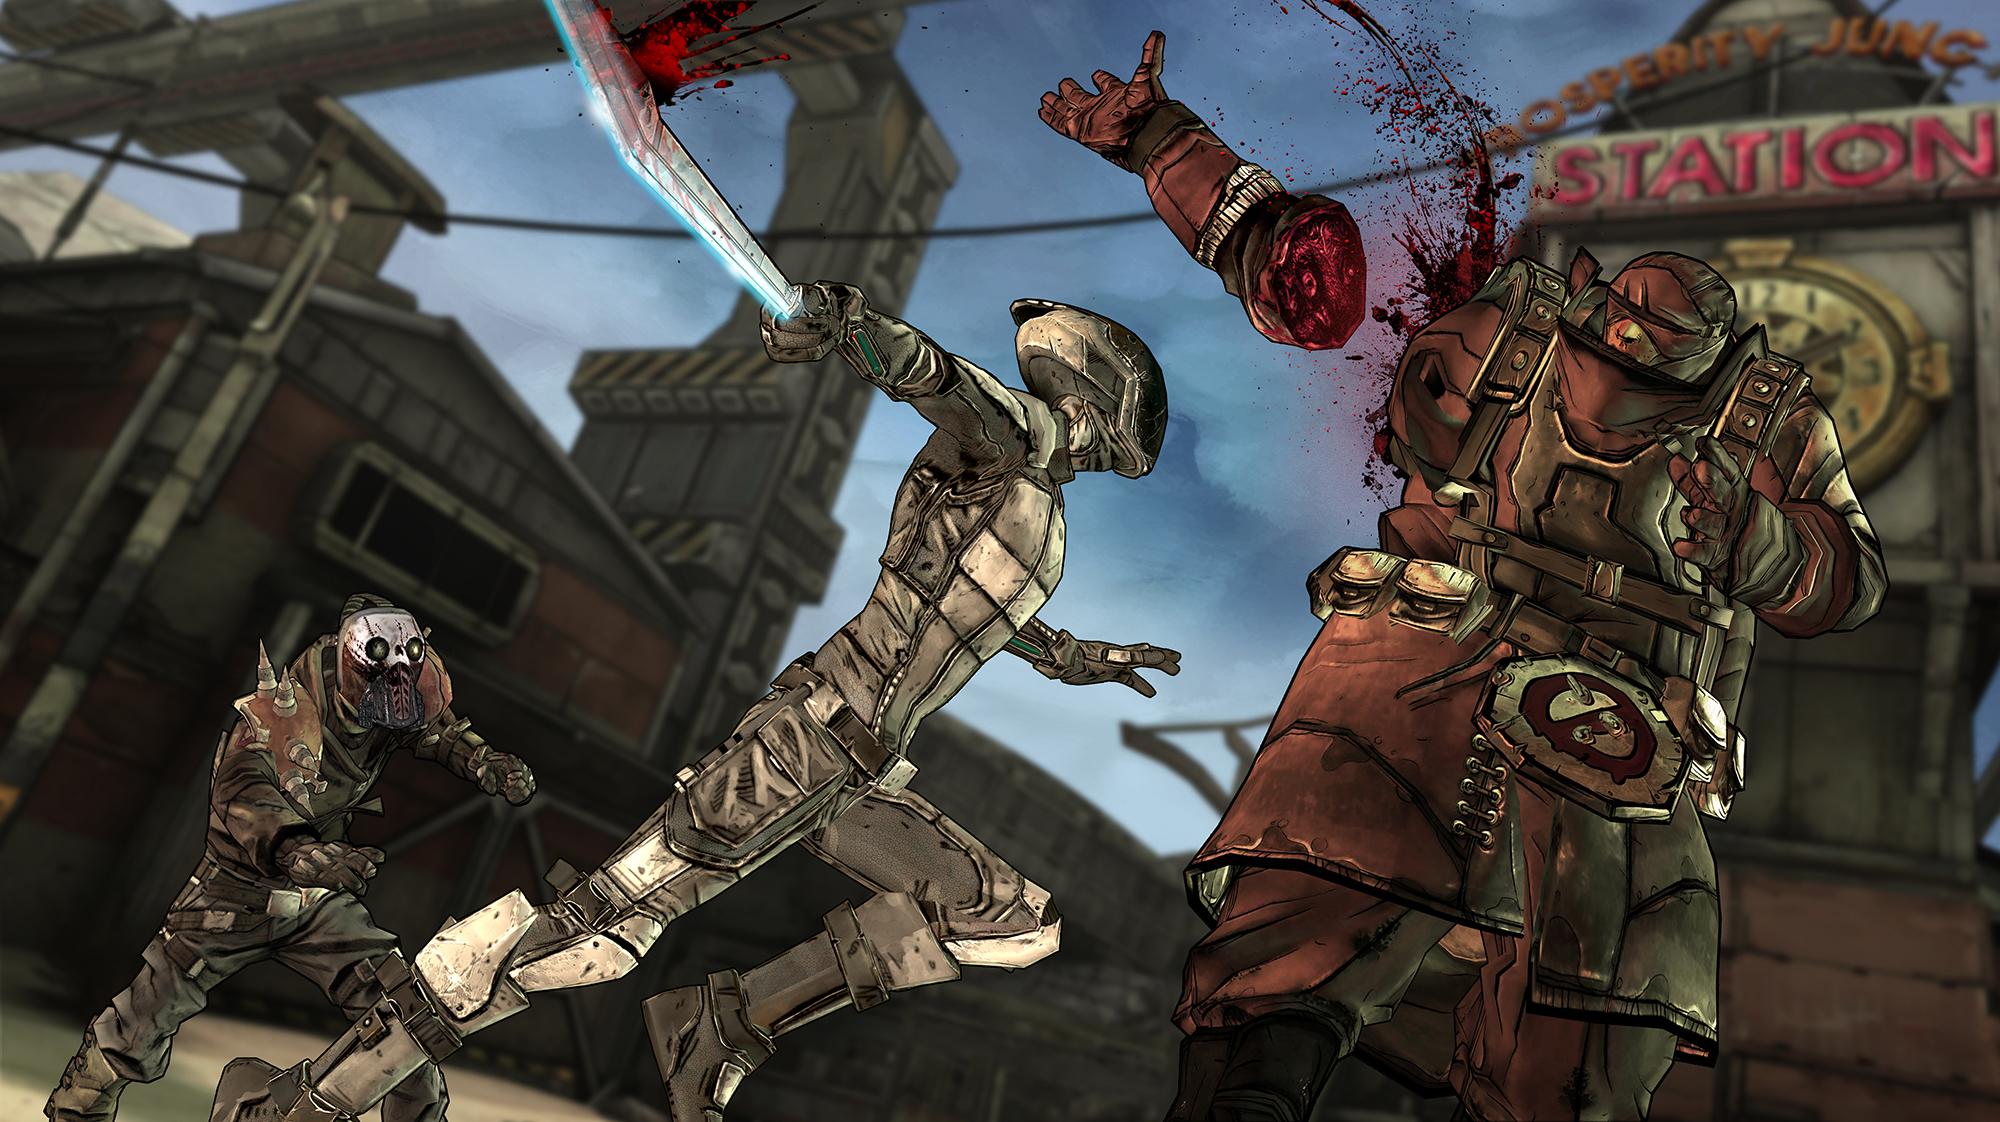 tales borderlands japanese oddities lead otherwise slow week gaming from the